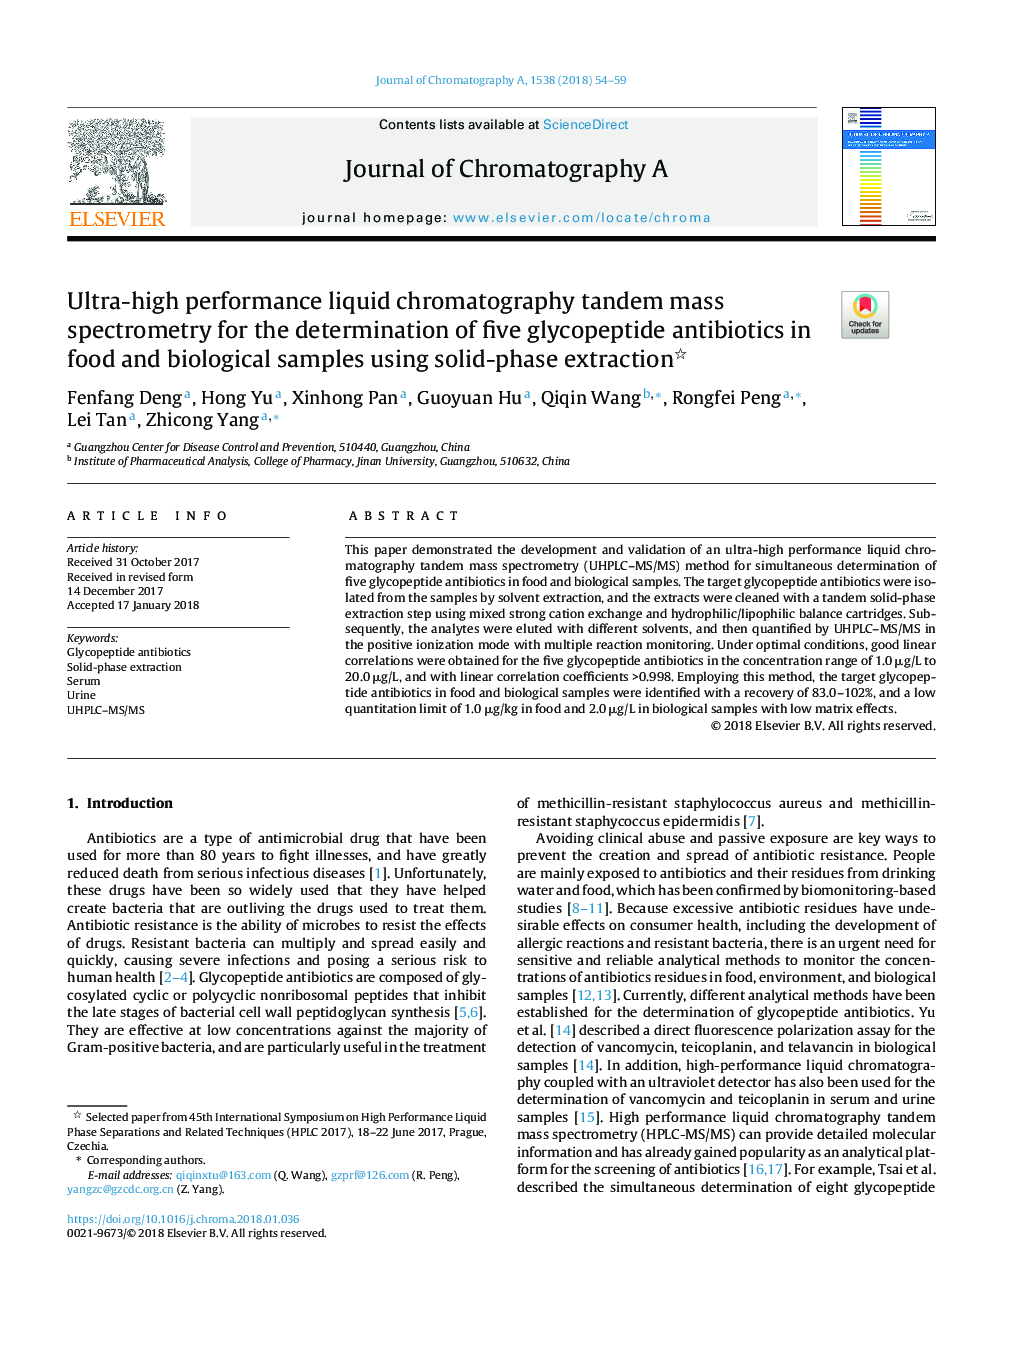 Ultra-high performance liquid chromatography tandem mass spectrometry for the determination of five glycopeptide antibiotics in food and biological samples using solid-phase extraction